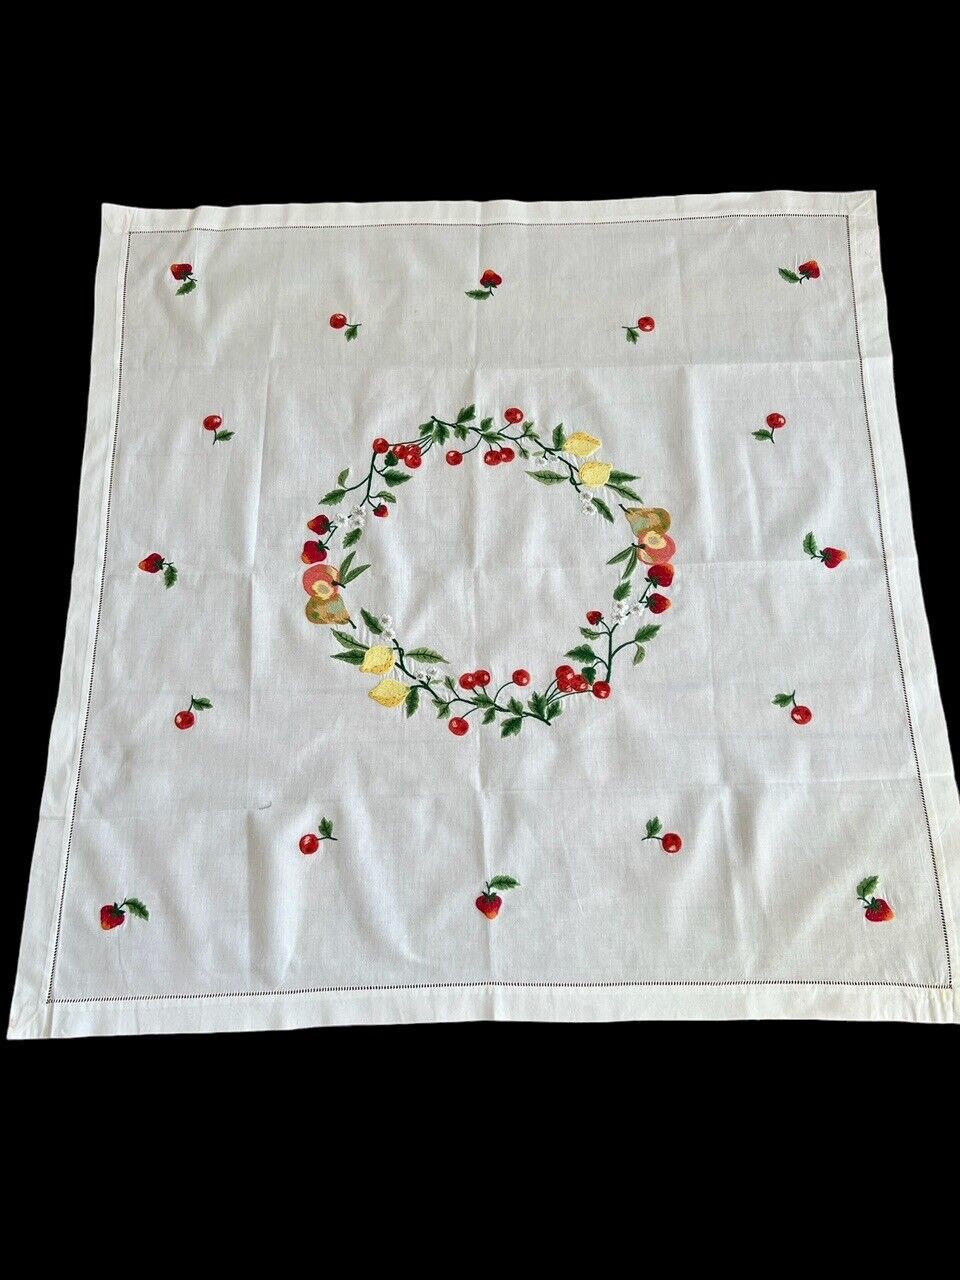 LOVELY EMBROIDERED TABLECLOTH W/POLYCHROME EMBROIDERY W/WREATHS AND FRUIT